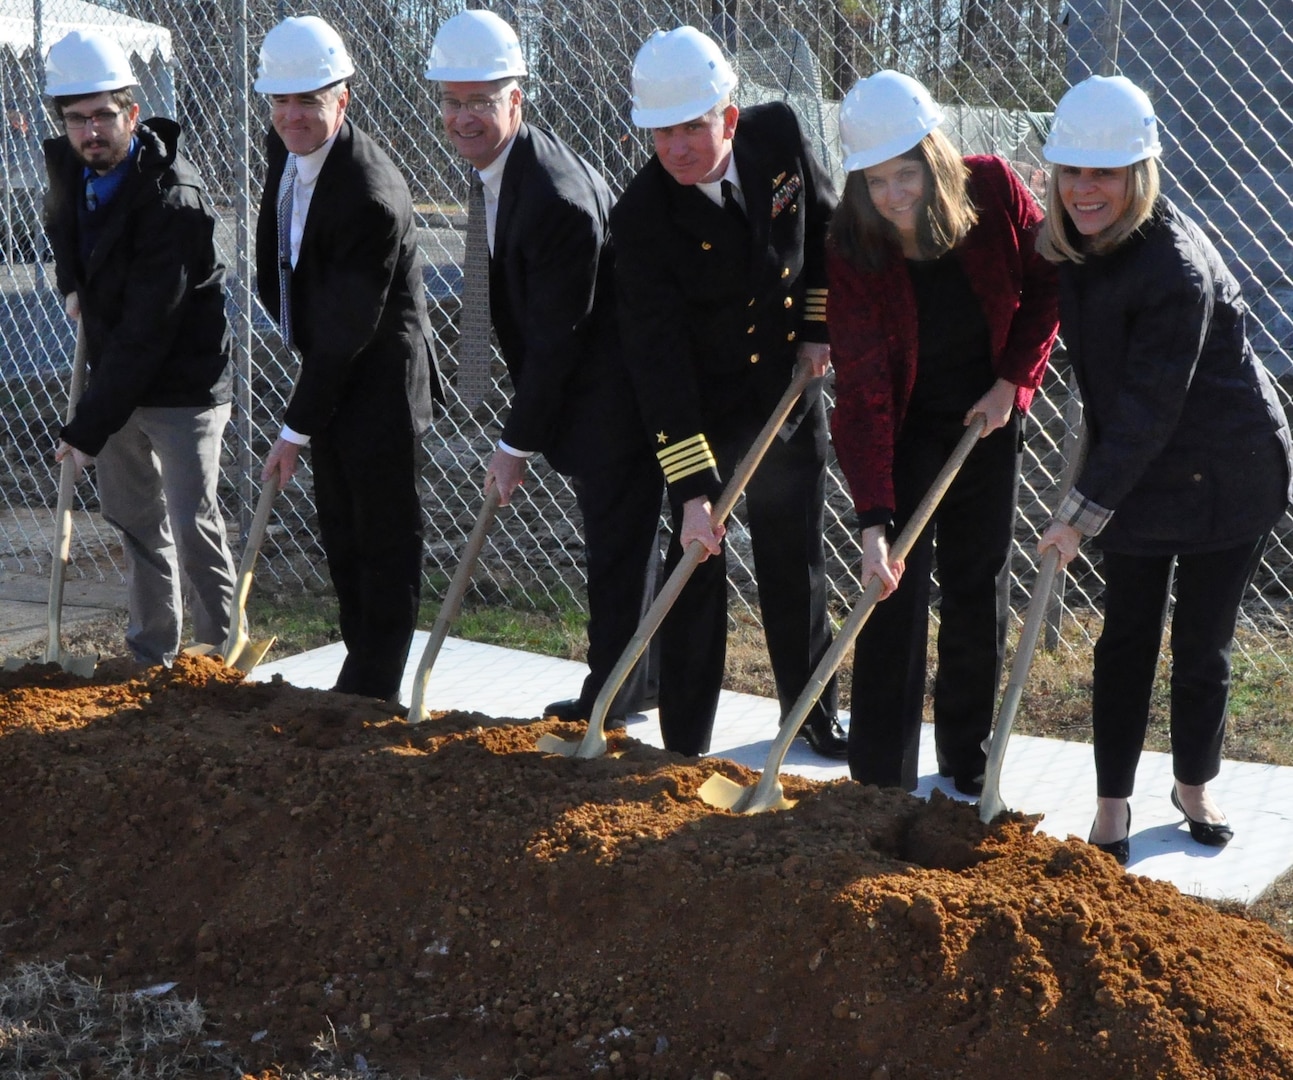 IMAGE: DAHLGREN, Va. (Dec. 12, 2019) – Navy officials, including Naval Surface Warfare Center Dahlgren Division (NSWCDD) leadership, break ground for the command’s new Cyber Warfare Engineering Laboratory, Dec. 12. The facility will bring together the building blocks of existing capabilities into one place to provide a robust and flexible software and hardware testing capability for Department of Defense and Navy weapon systems, cyber and network platforms in addition to industrial control systems supporting DoD infrastructure. From left to right: Christopher Keener, NSWCDD cyber engineer; Darren Barnes, NSWCDD acting technical director; Scott St. Pierre, Enterprise Information Technology officer, Naval Sea Systems Command; Capt. Casey Plew, NSWCDD commanding officer; Shellie Clift, NSWCDD Strategic and Computing Systems Department head; Nancy Fitzgerald, principal, CFM Engineering. (Photo by U.S. Navy/Released)